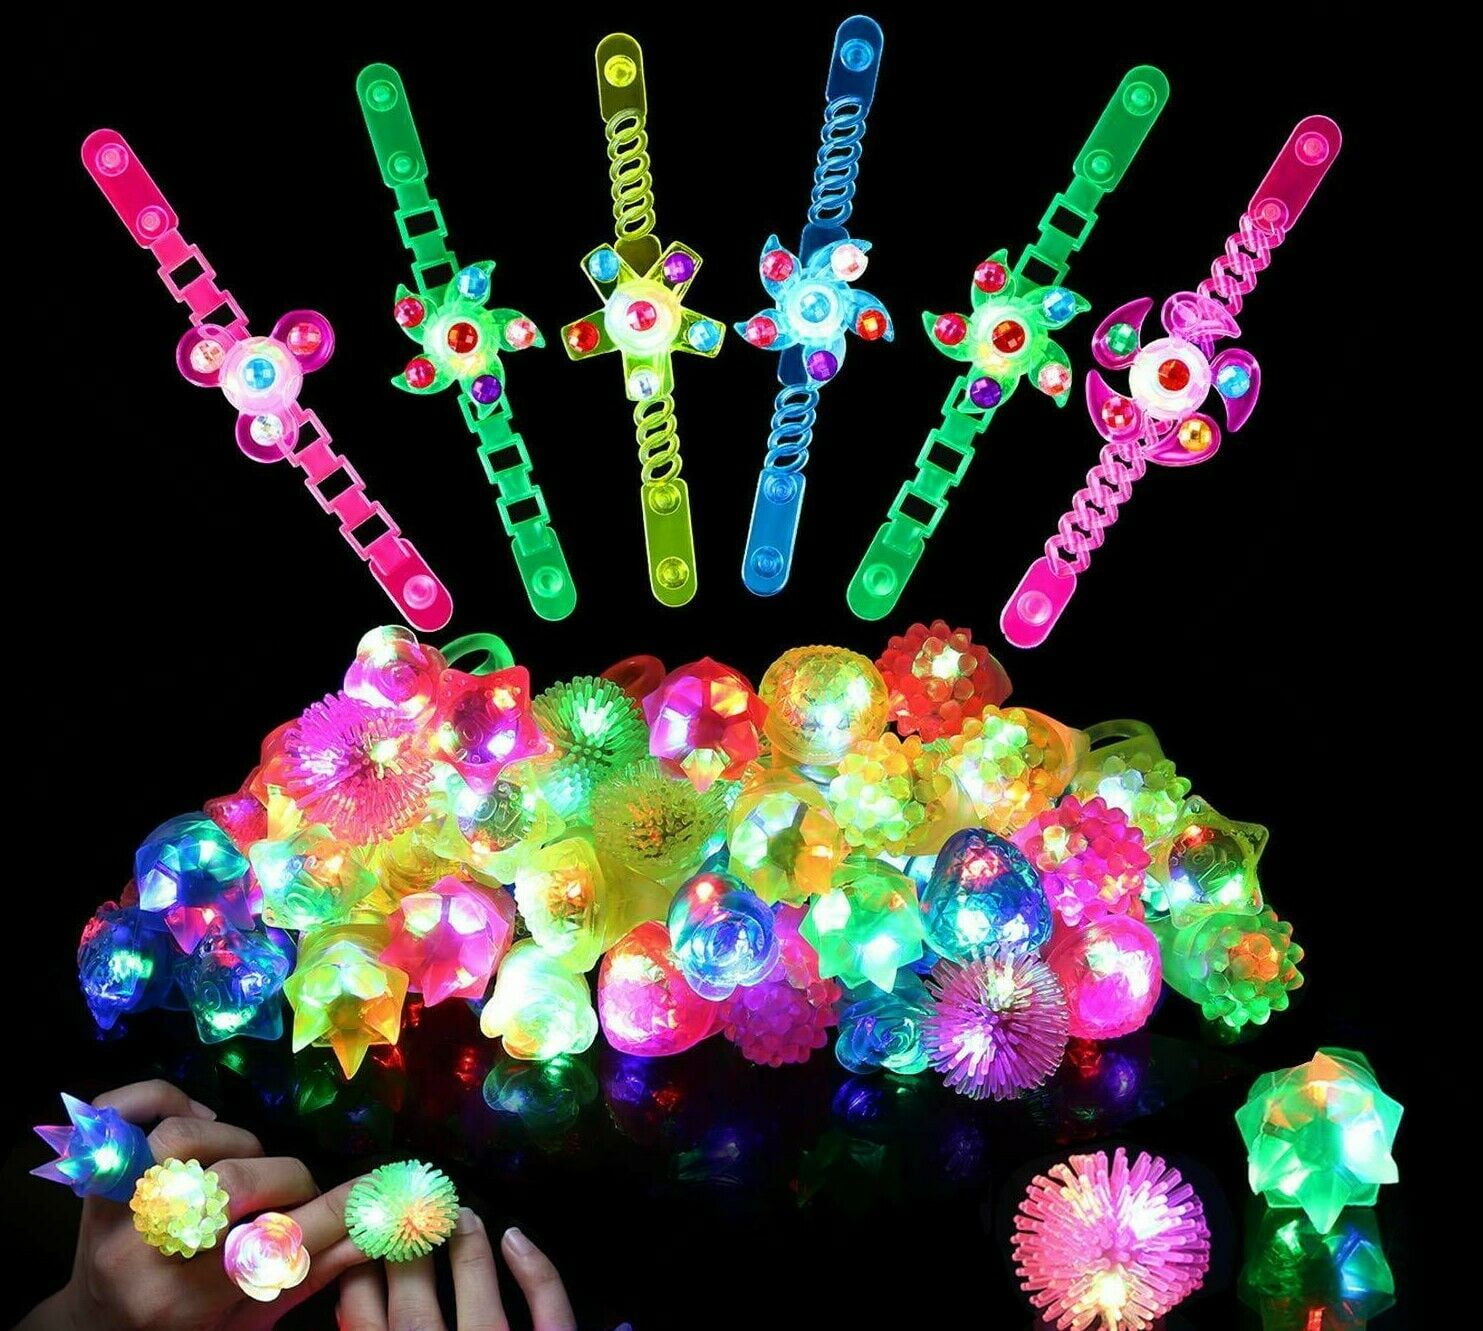 100 Count Glow in The Dark Bracelets 8 inch Assorted Colors for Boy and Girls, Kids Unisex, Grey Type